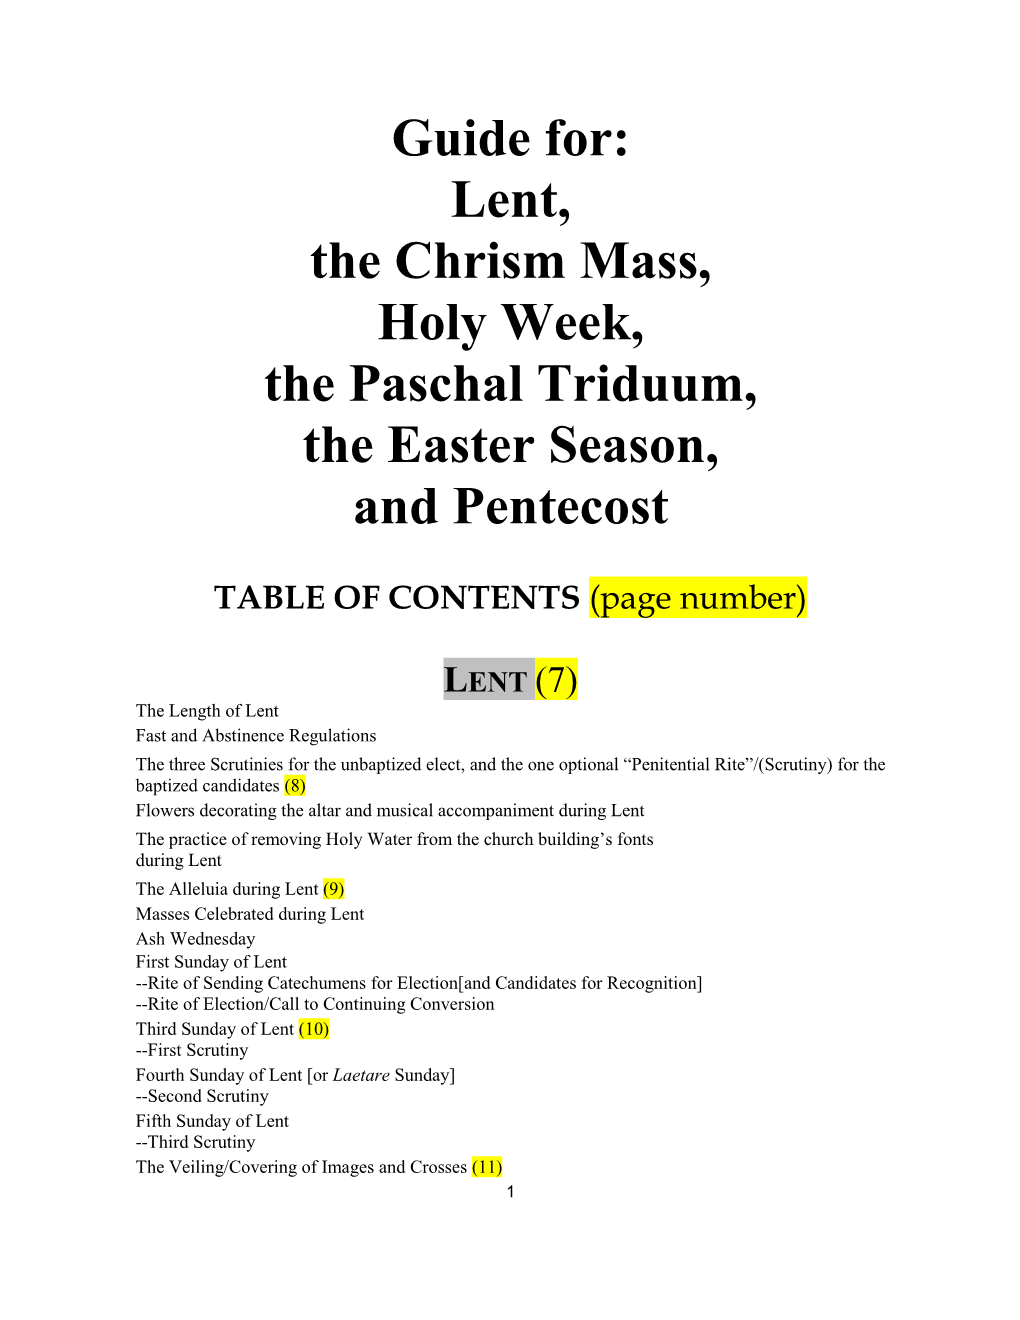 Lent, the Chrism Mass, Holy Week, the Paschal Triduum, the Easter Season, and Pentecost